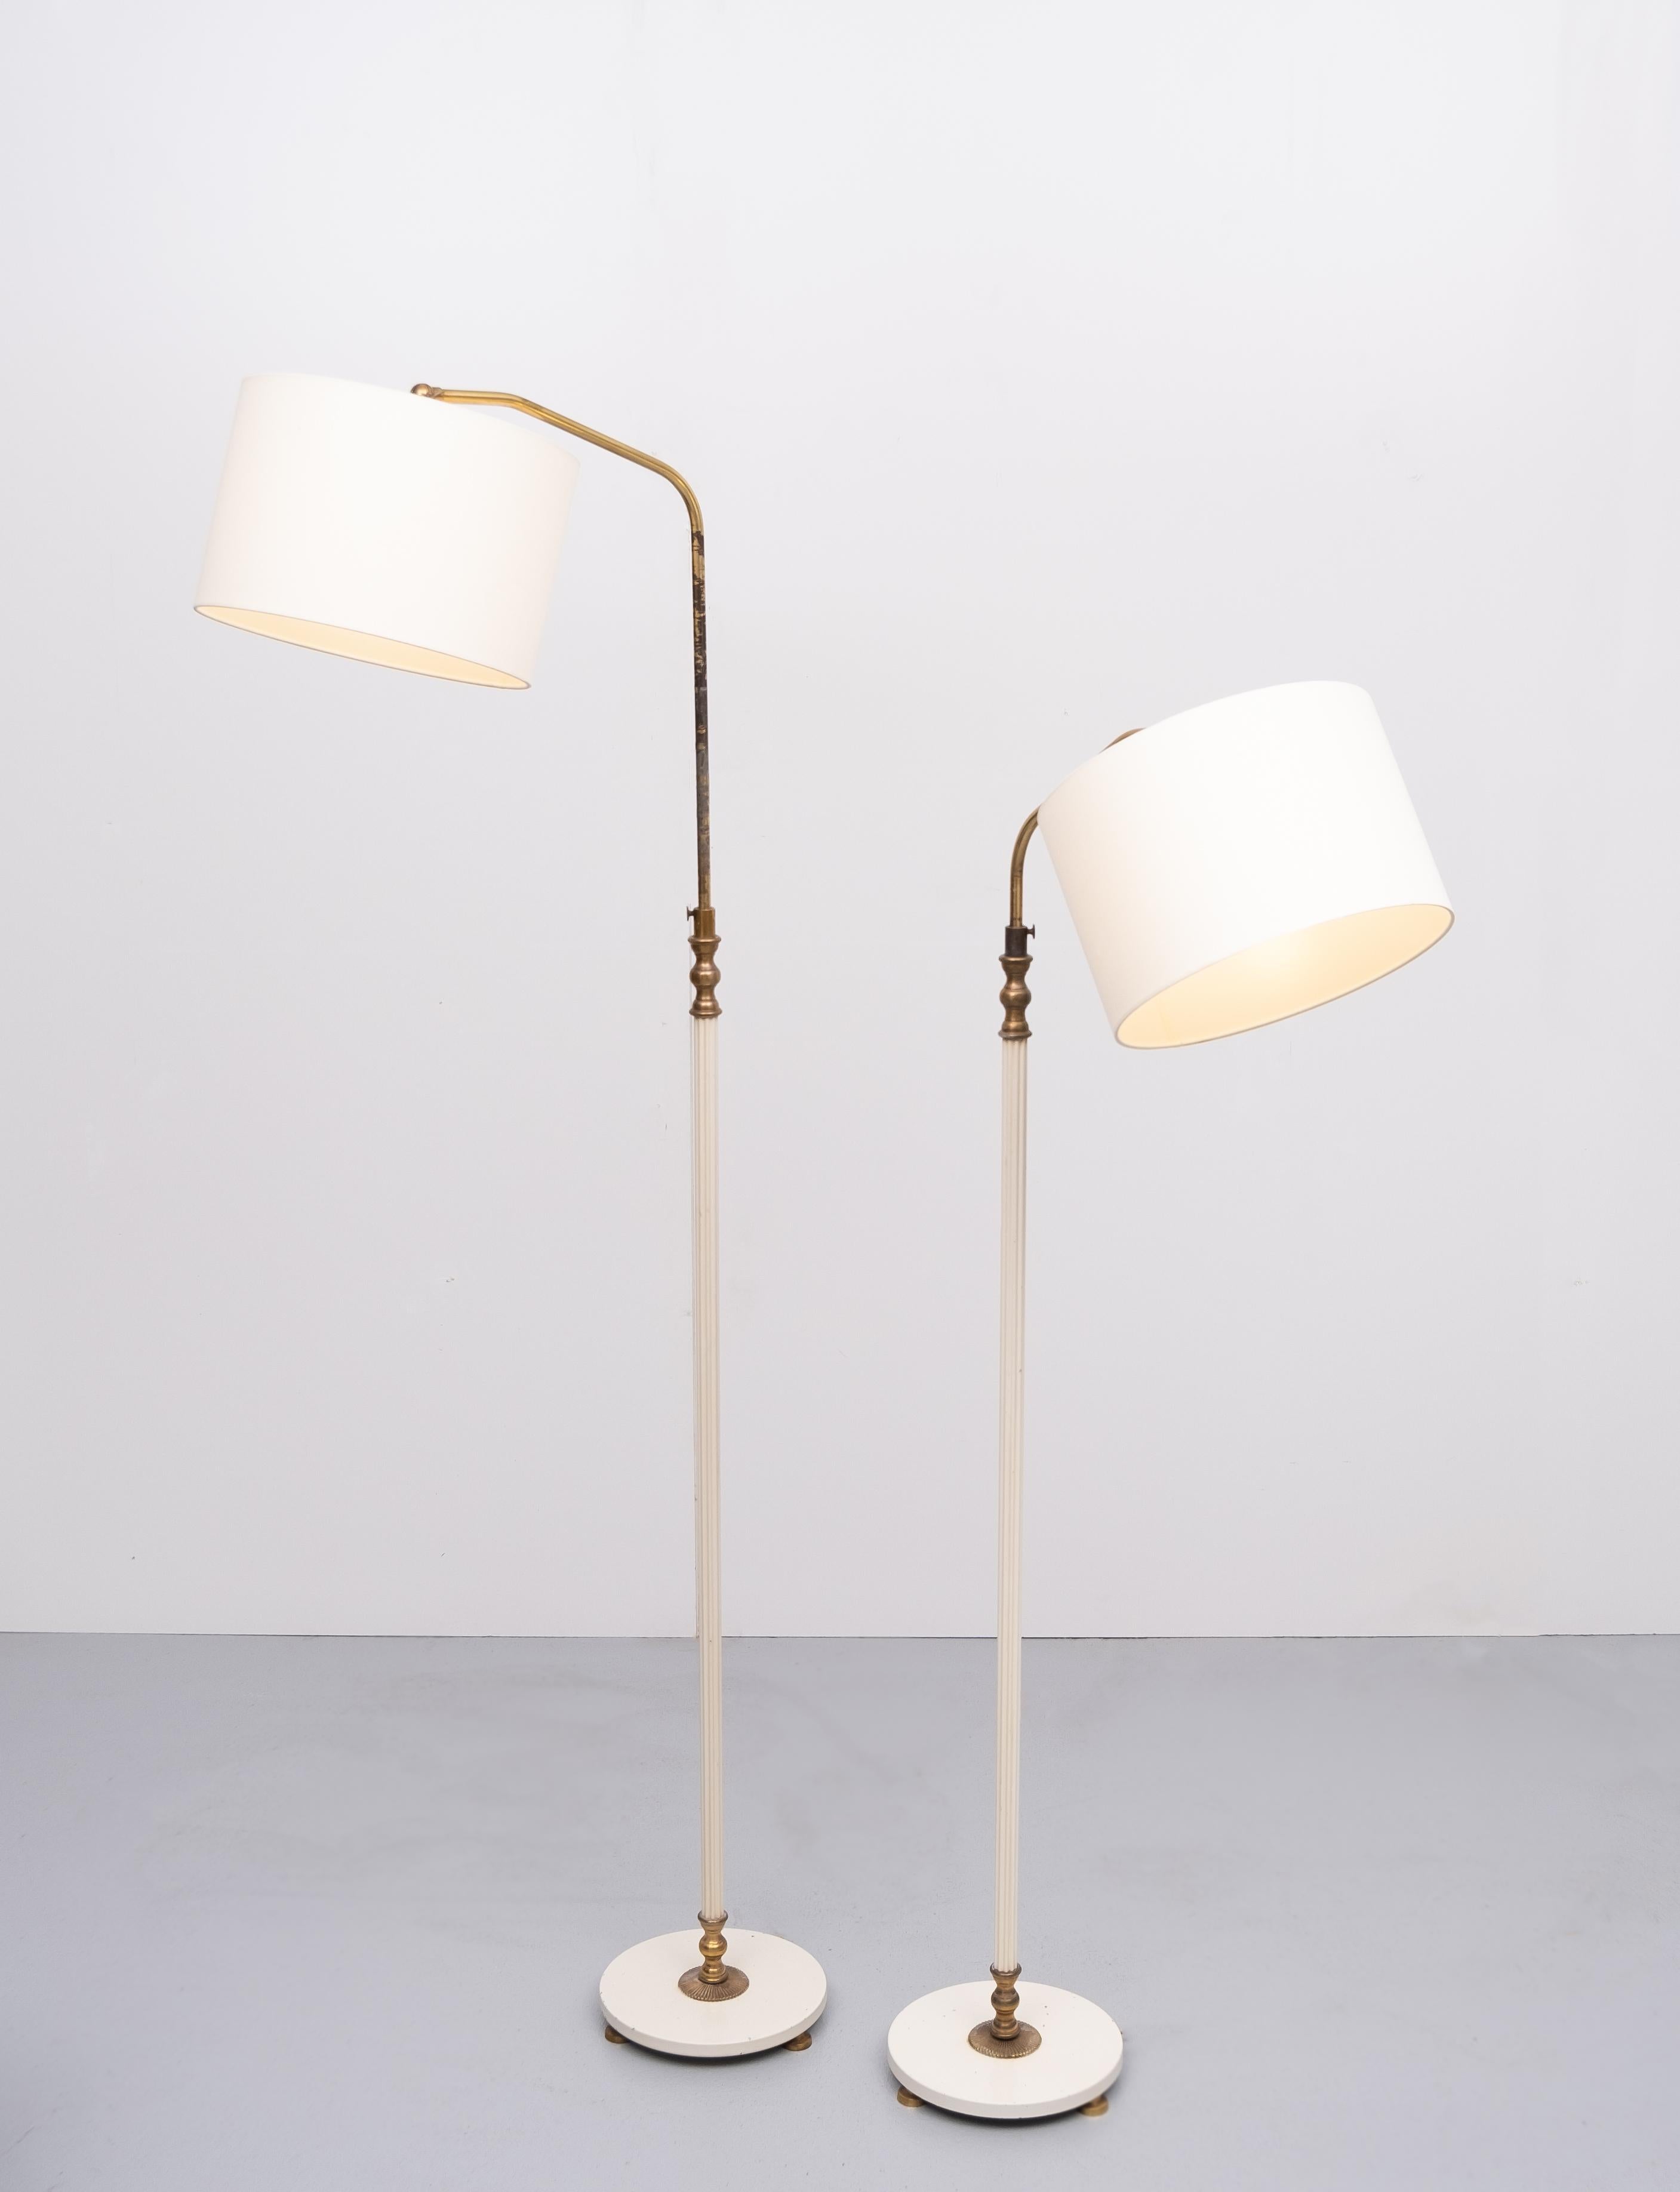 Two identical goose necks floor lamps. Adjustable in height. White metal base with brass
details. Very nice Classic design, France, 1950s. Good working condition. One large bulb each.